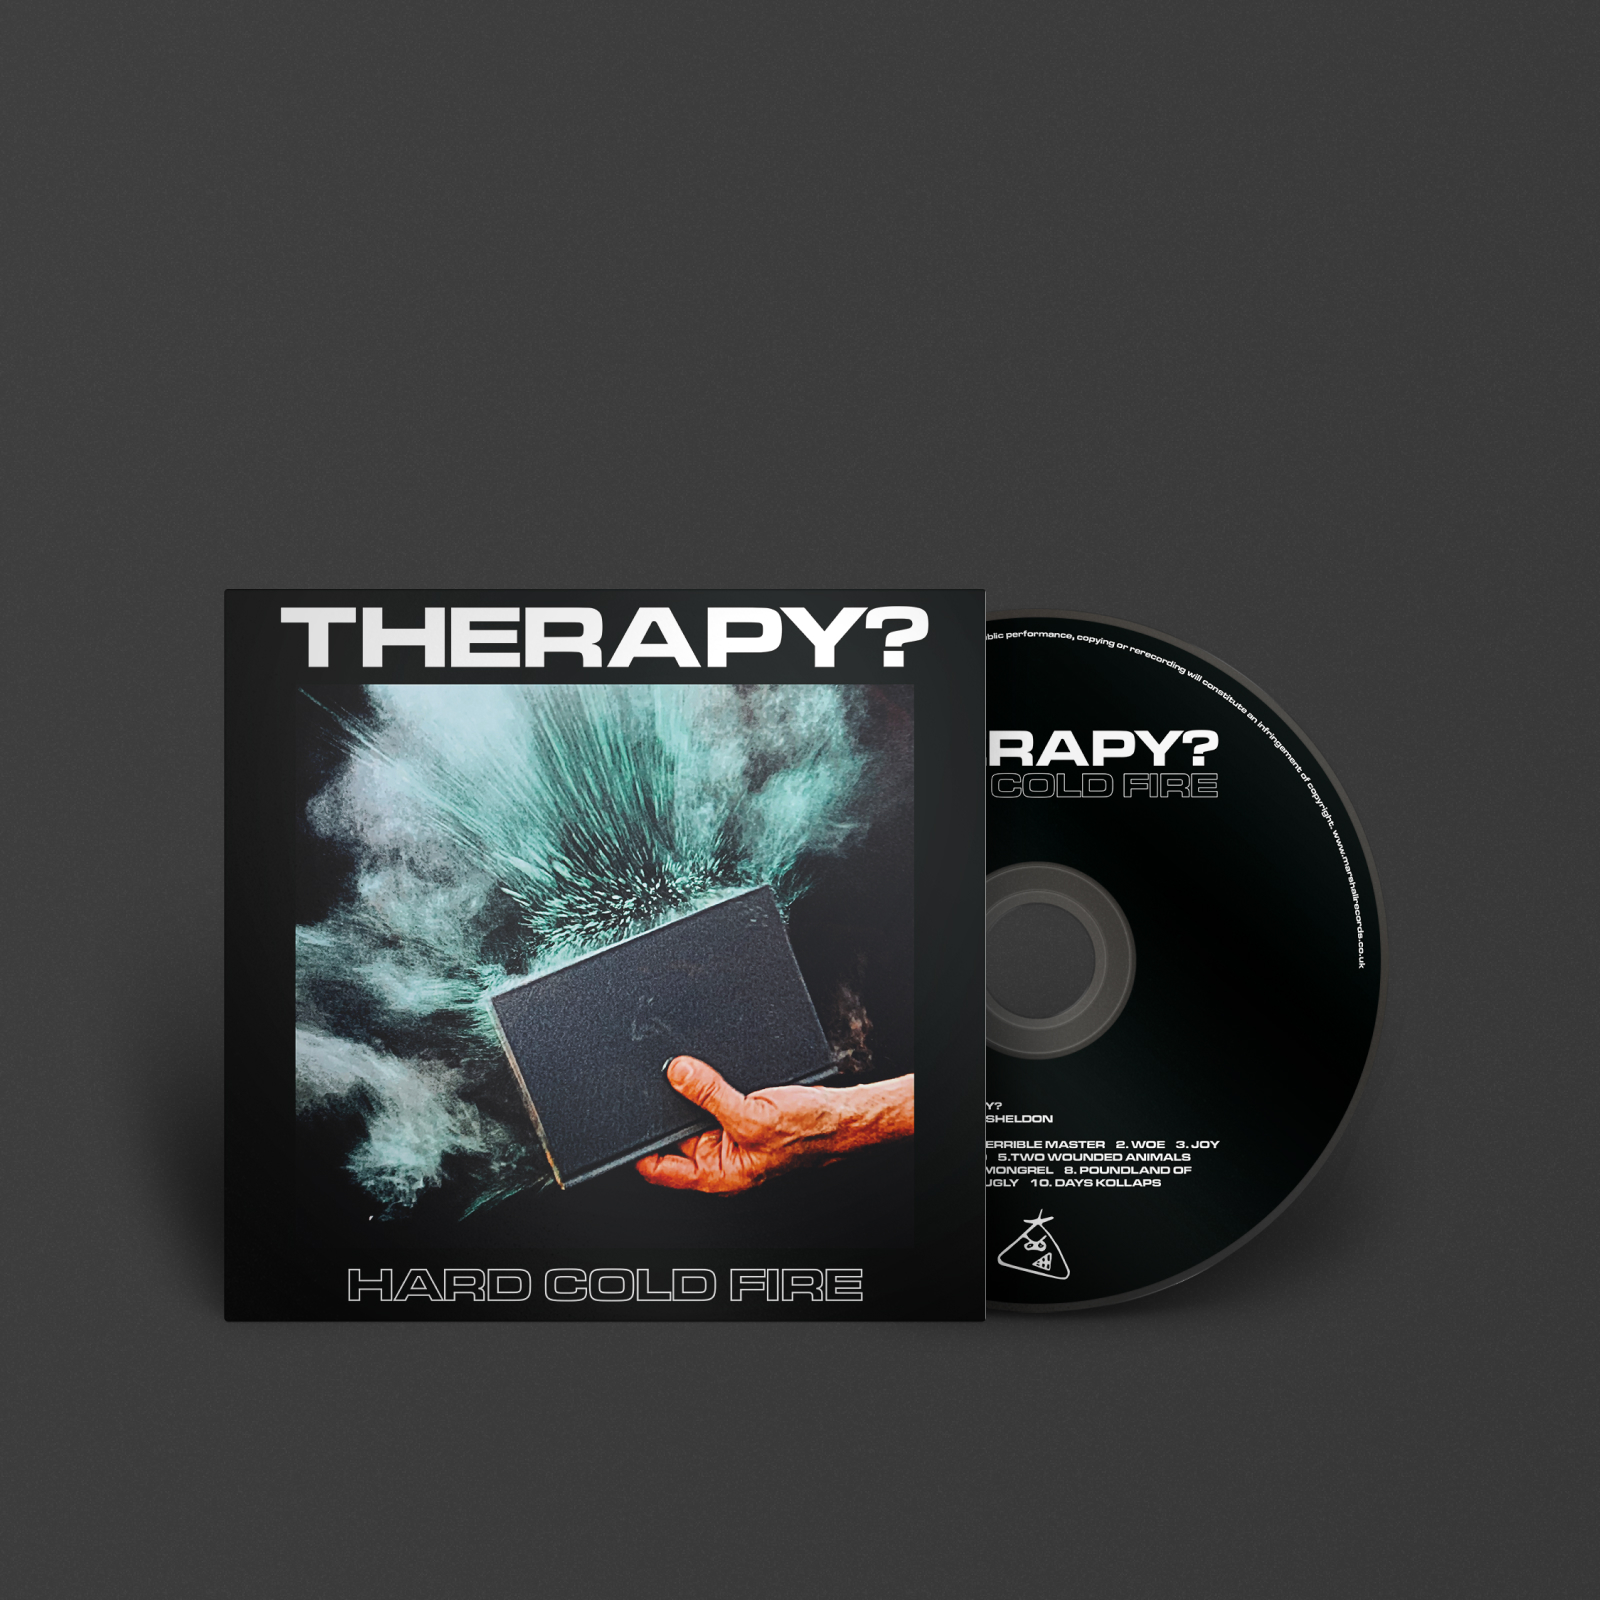 CD "Hard Cold Fire" du groupe "Therapy ?